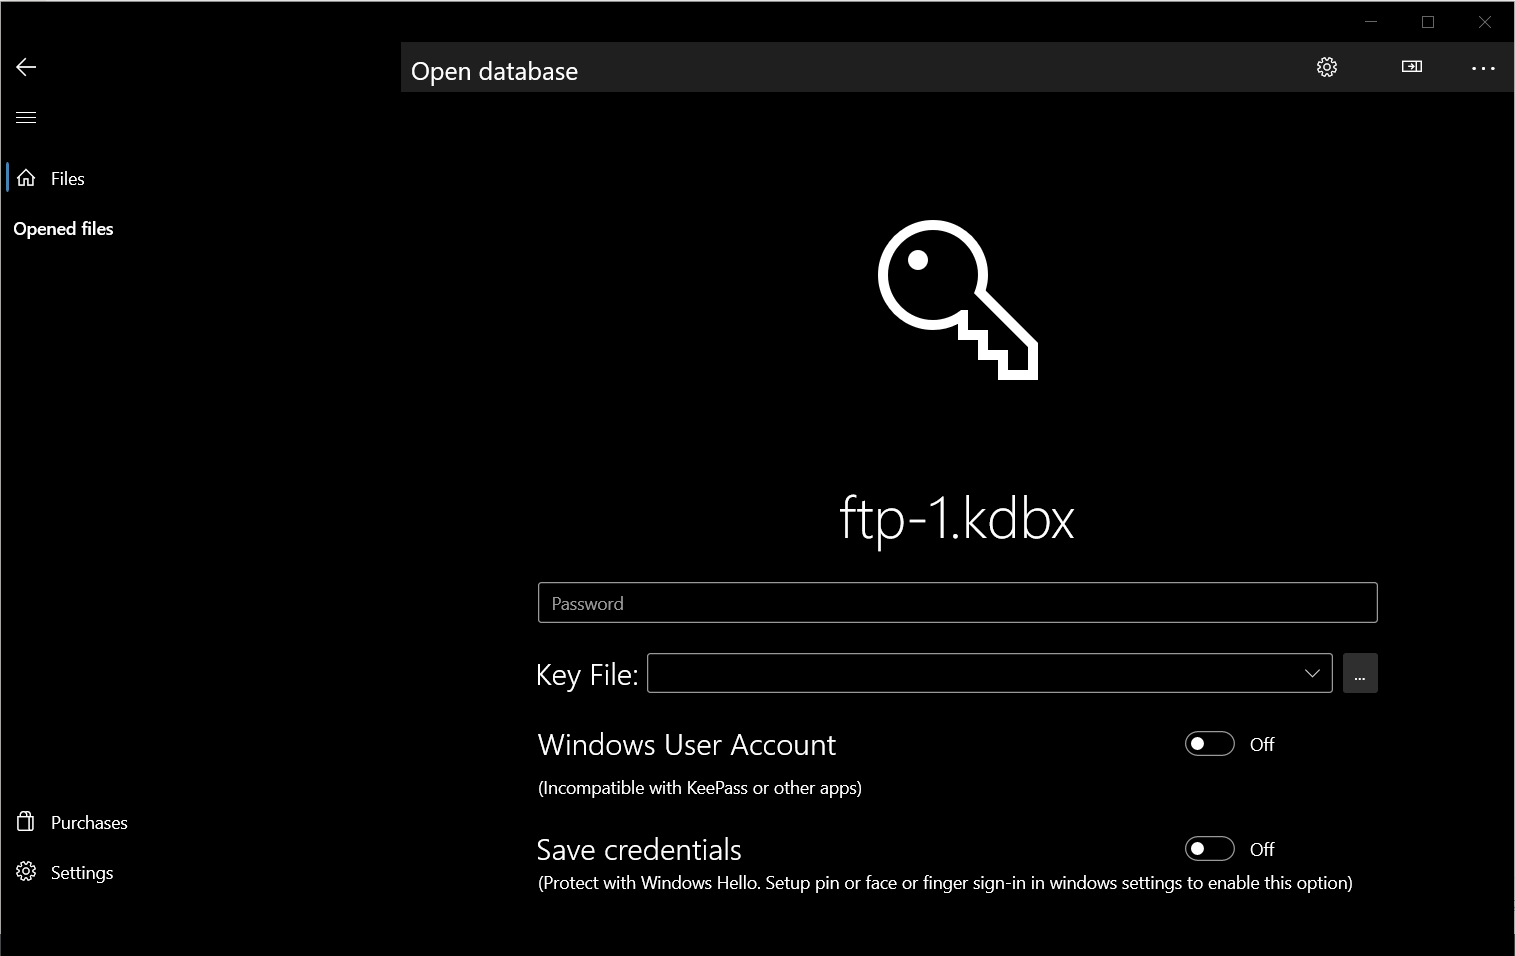 Protect your data with Password, KeyFile, Windows User Account and Windows Hello